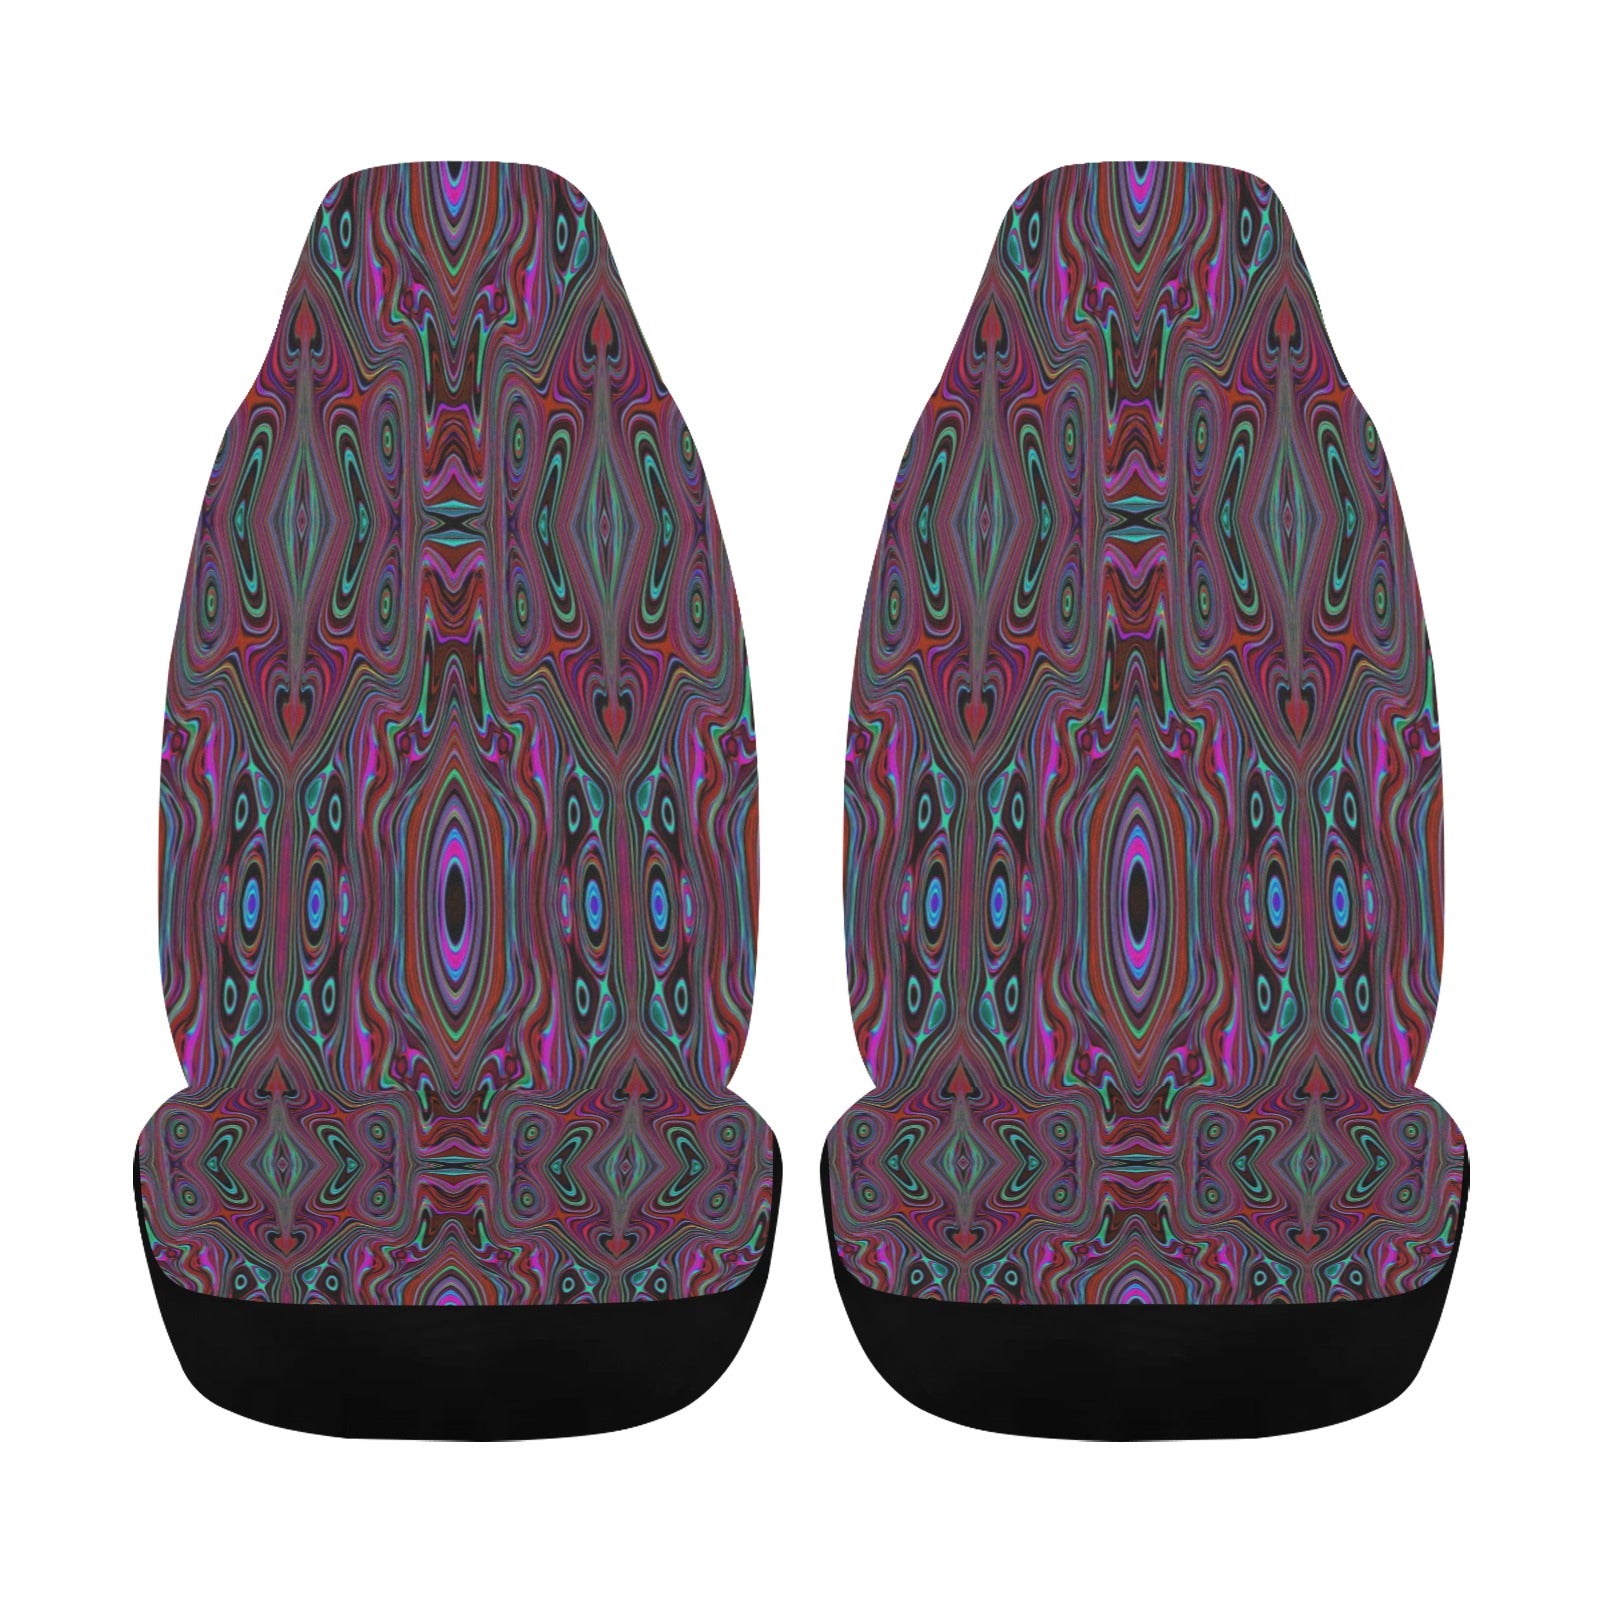 Car Seat Covers, Trippy Seafoam Green and Magenta Abstract Pattern